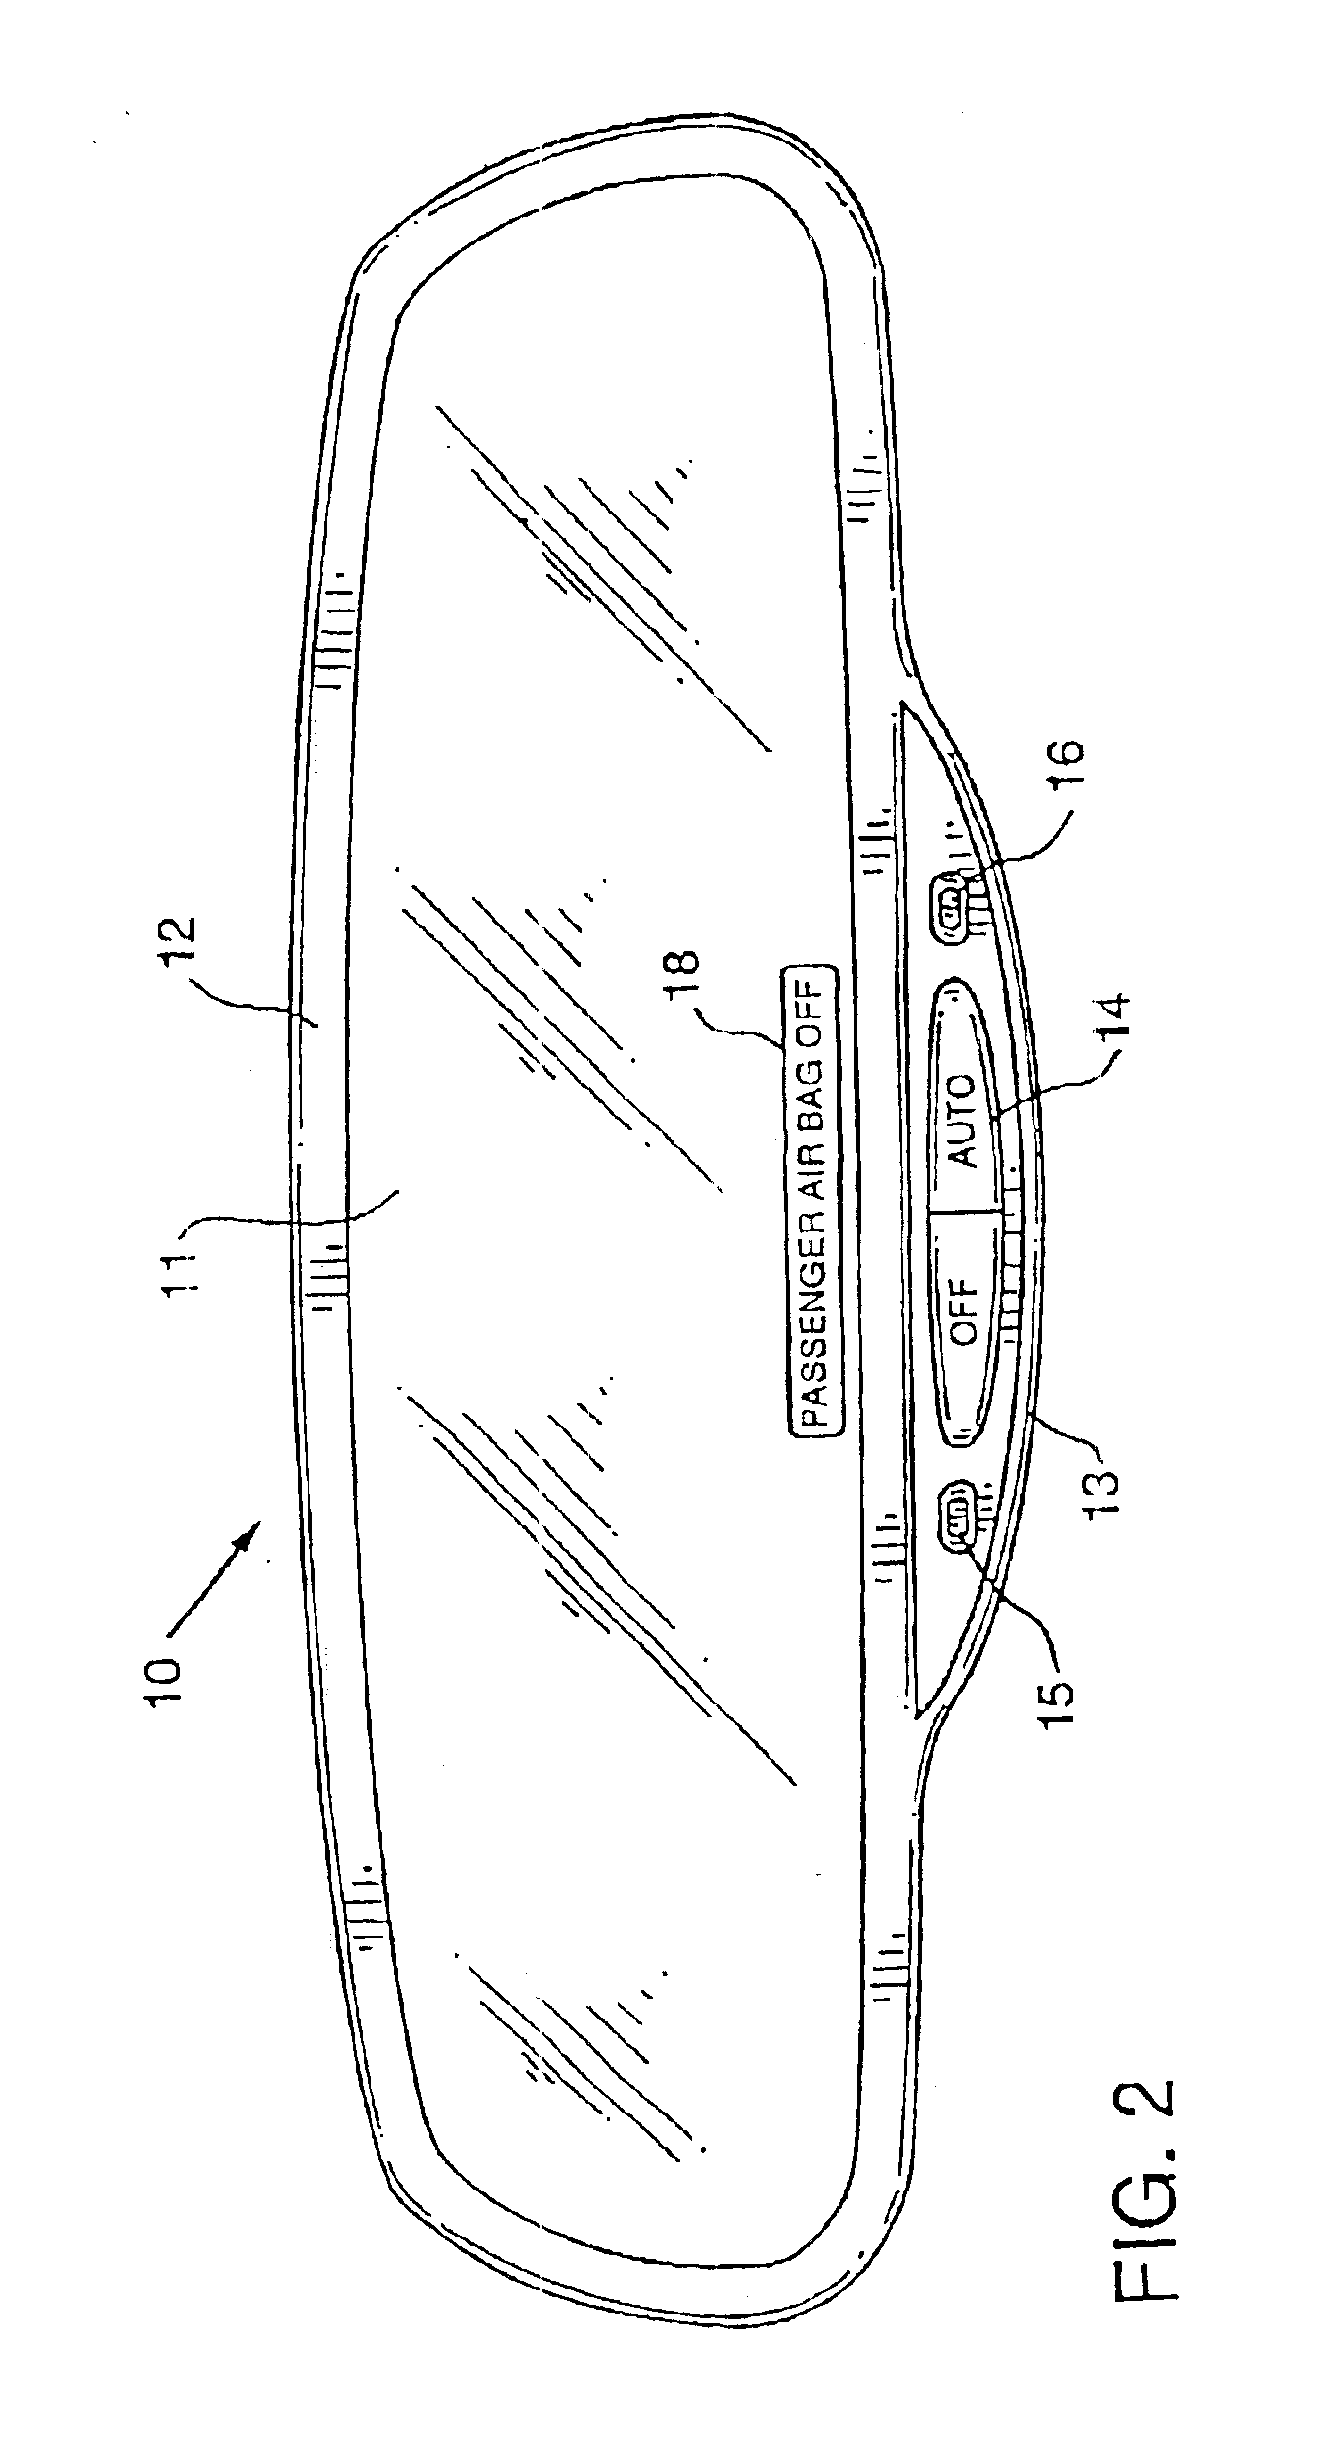 Rearview mirror with display